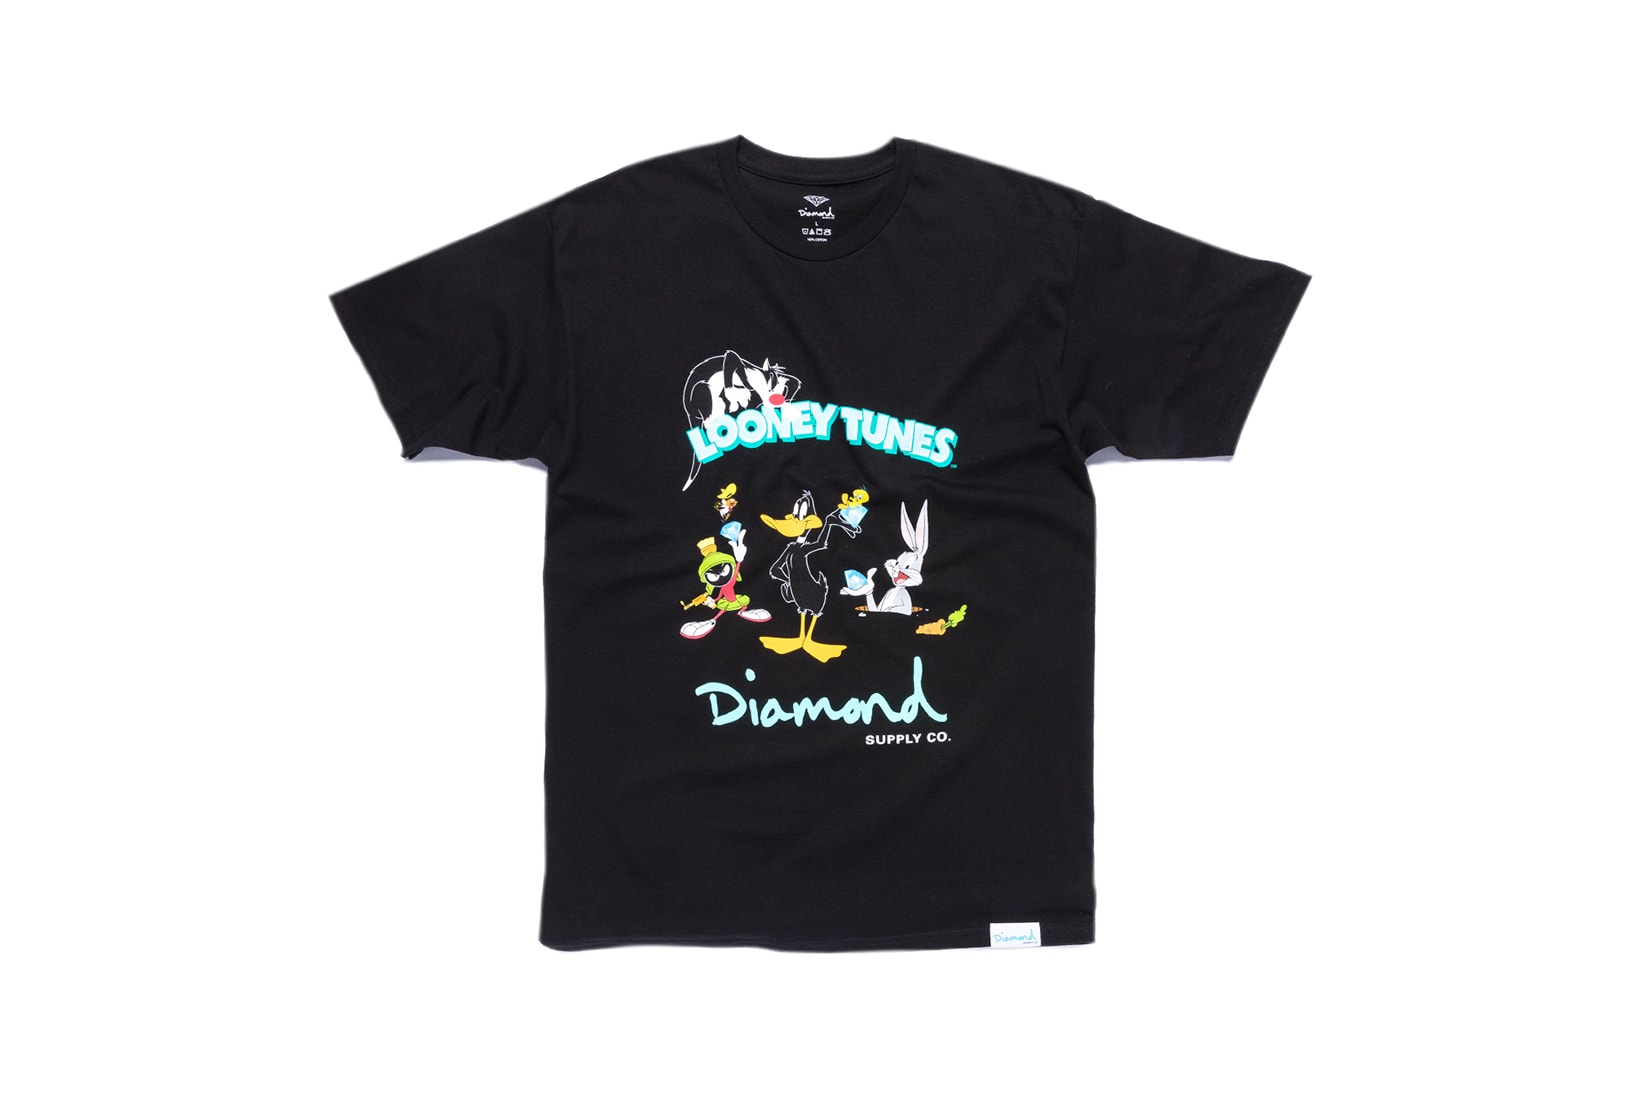 Looney Tunes x Diamond Supply Co. Collection Sylvester Bugs Bunny Daffy Duck Marvin the Martian T-Shirt Black